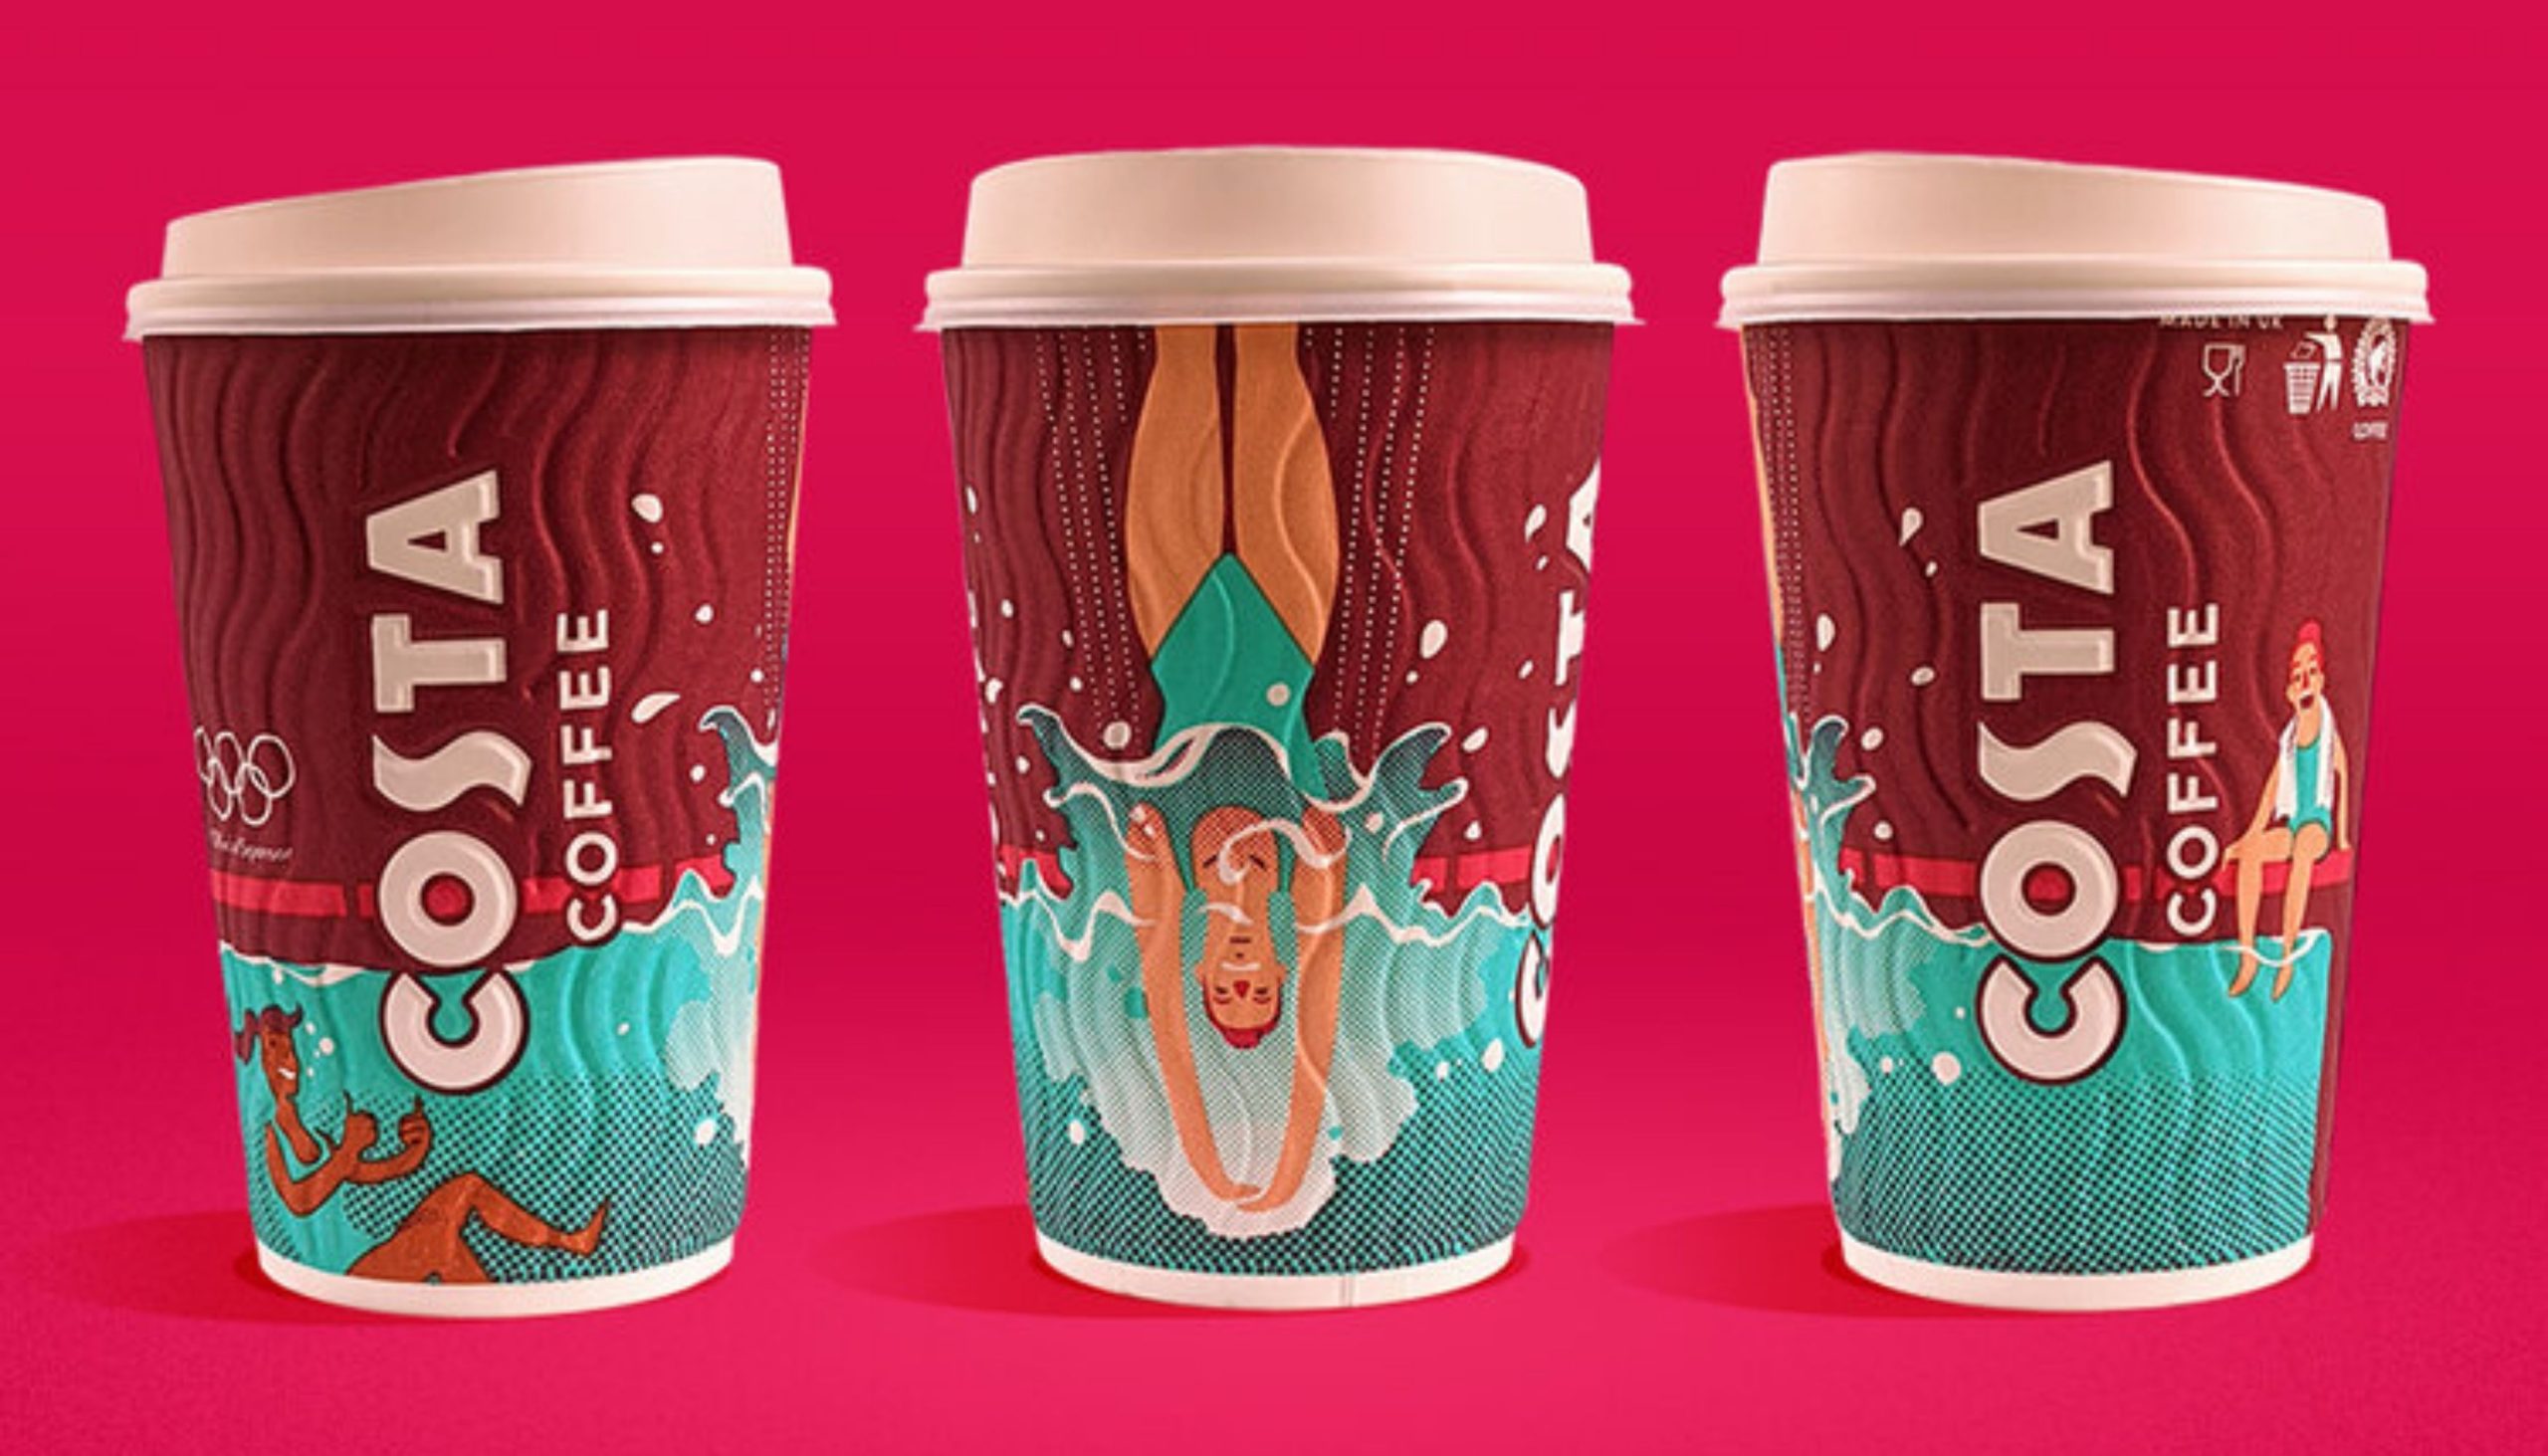 Costa Olympics Cups created for the Tokyo Olympic Games » CoffeeCode